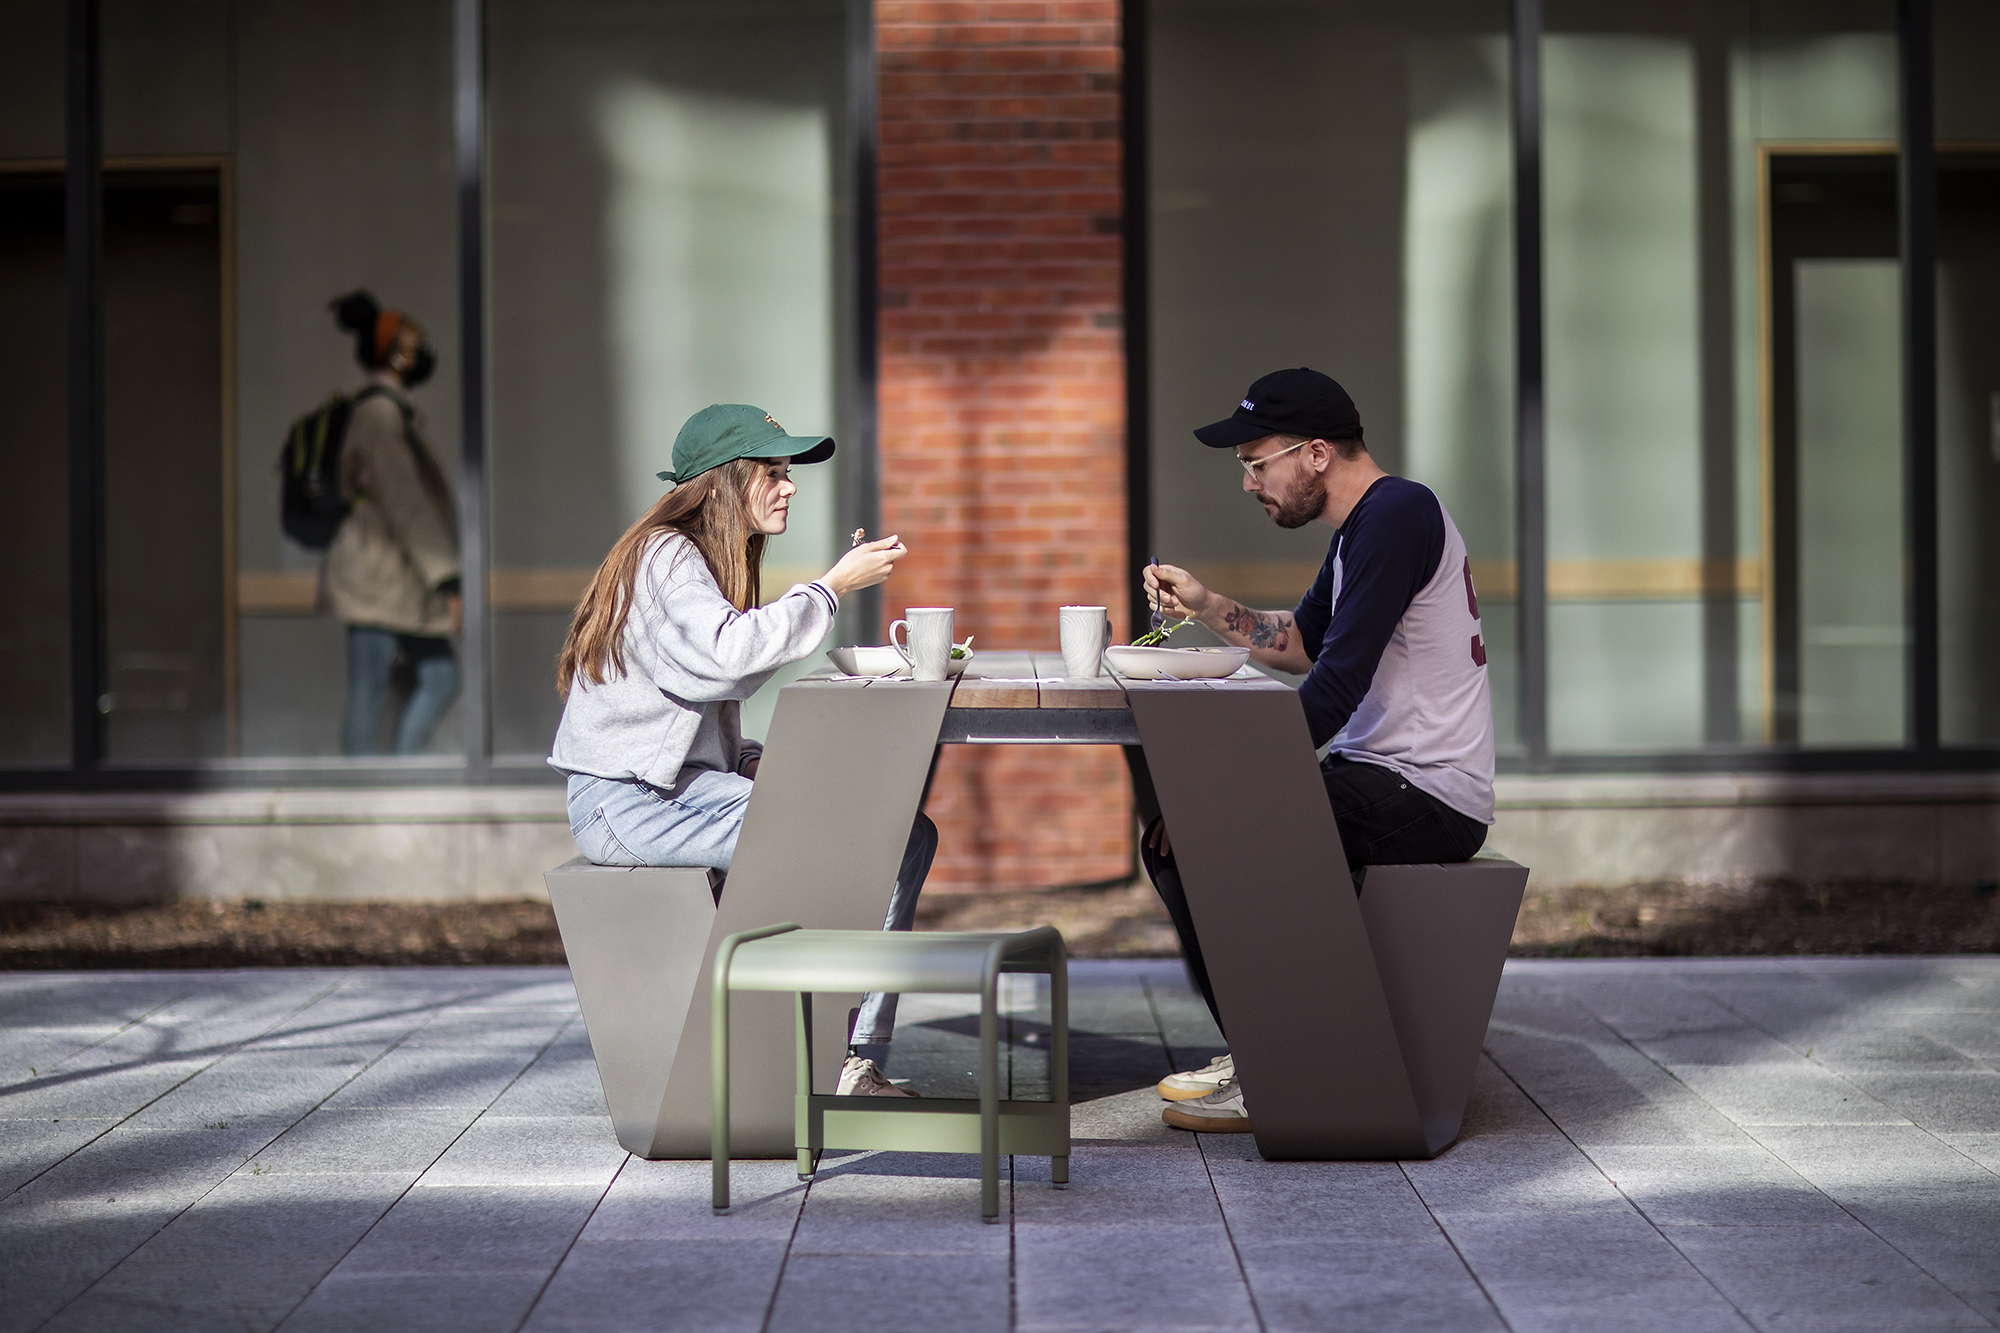 Two people sitting outside at a table eating food, with a person inside blurred in the background.